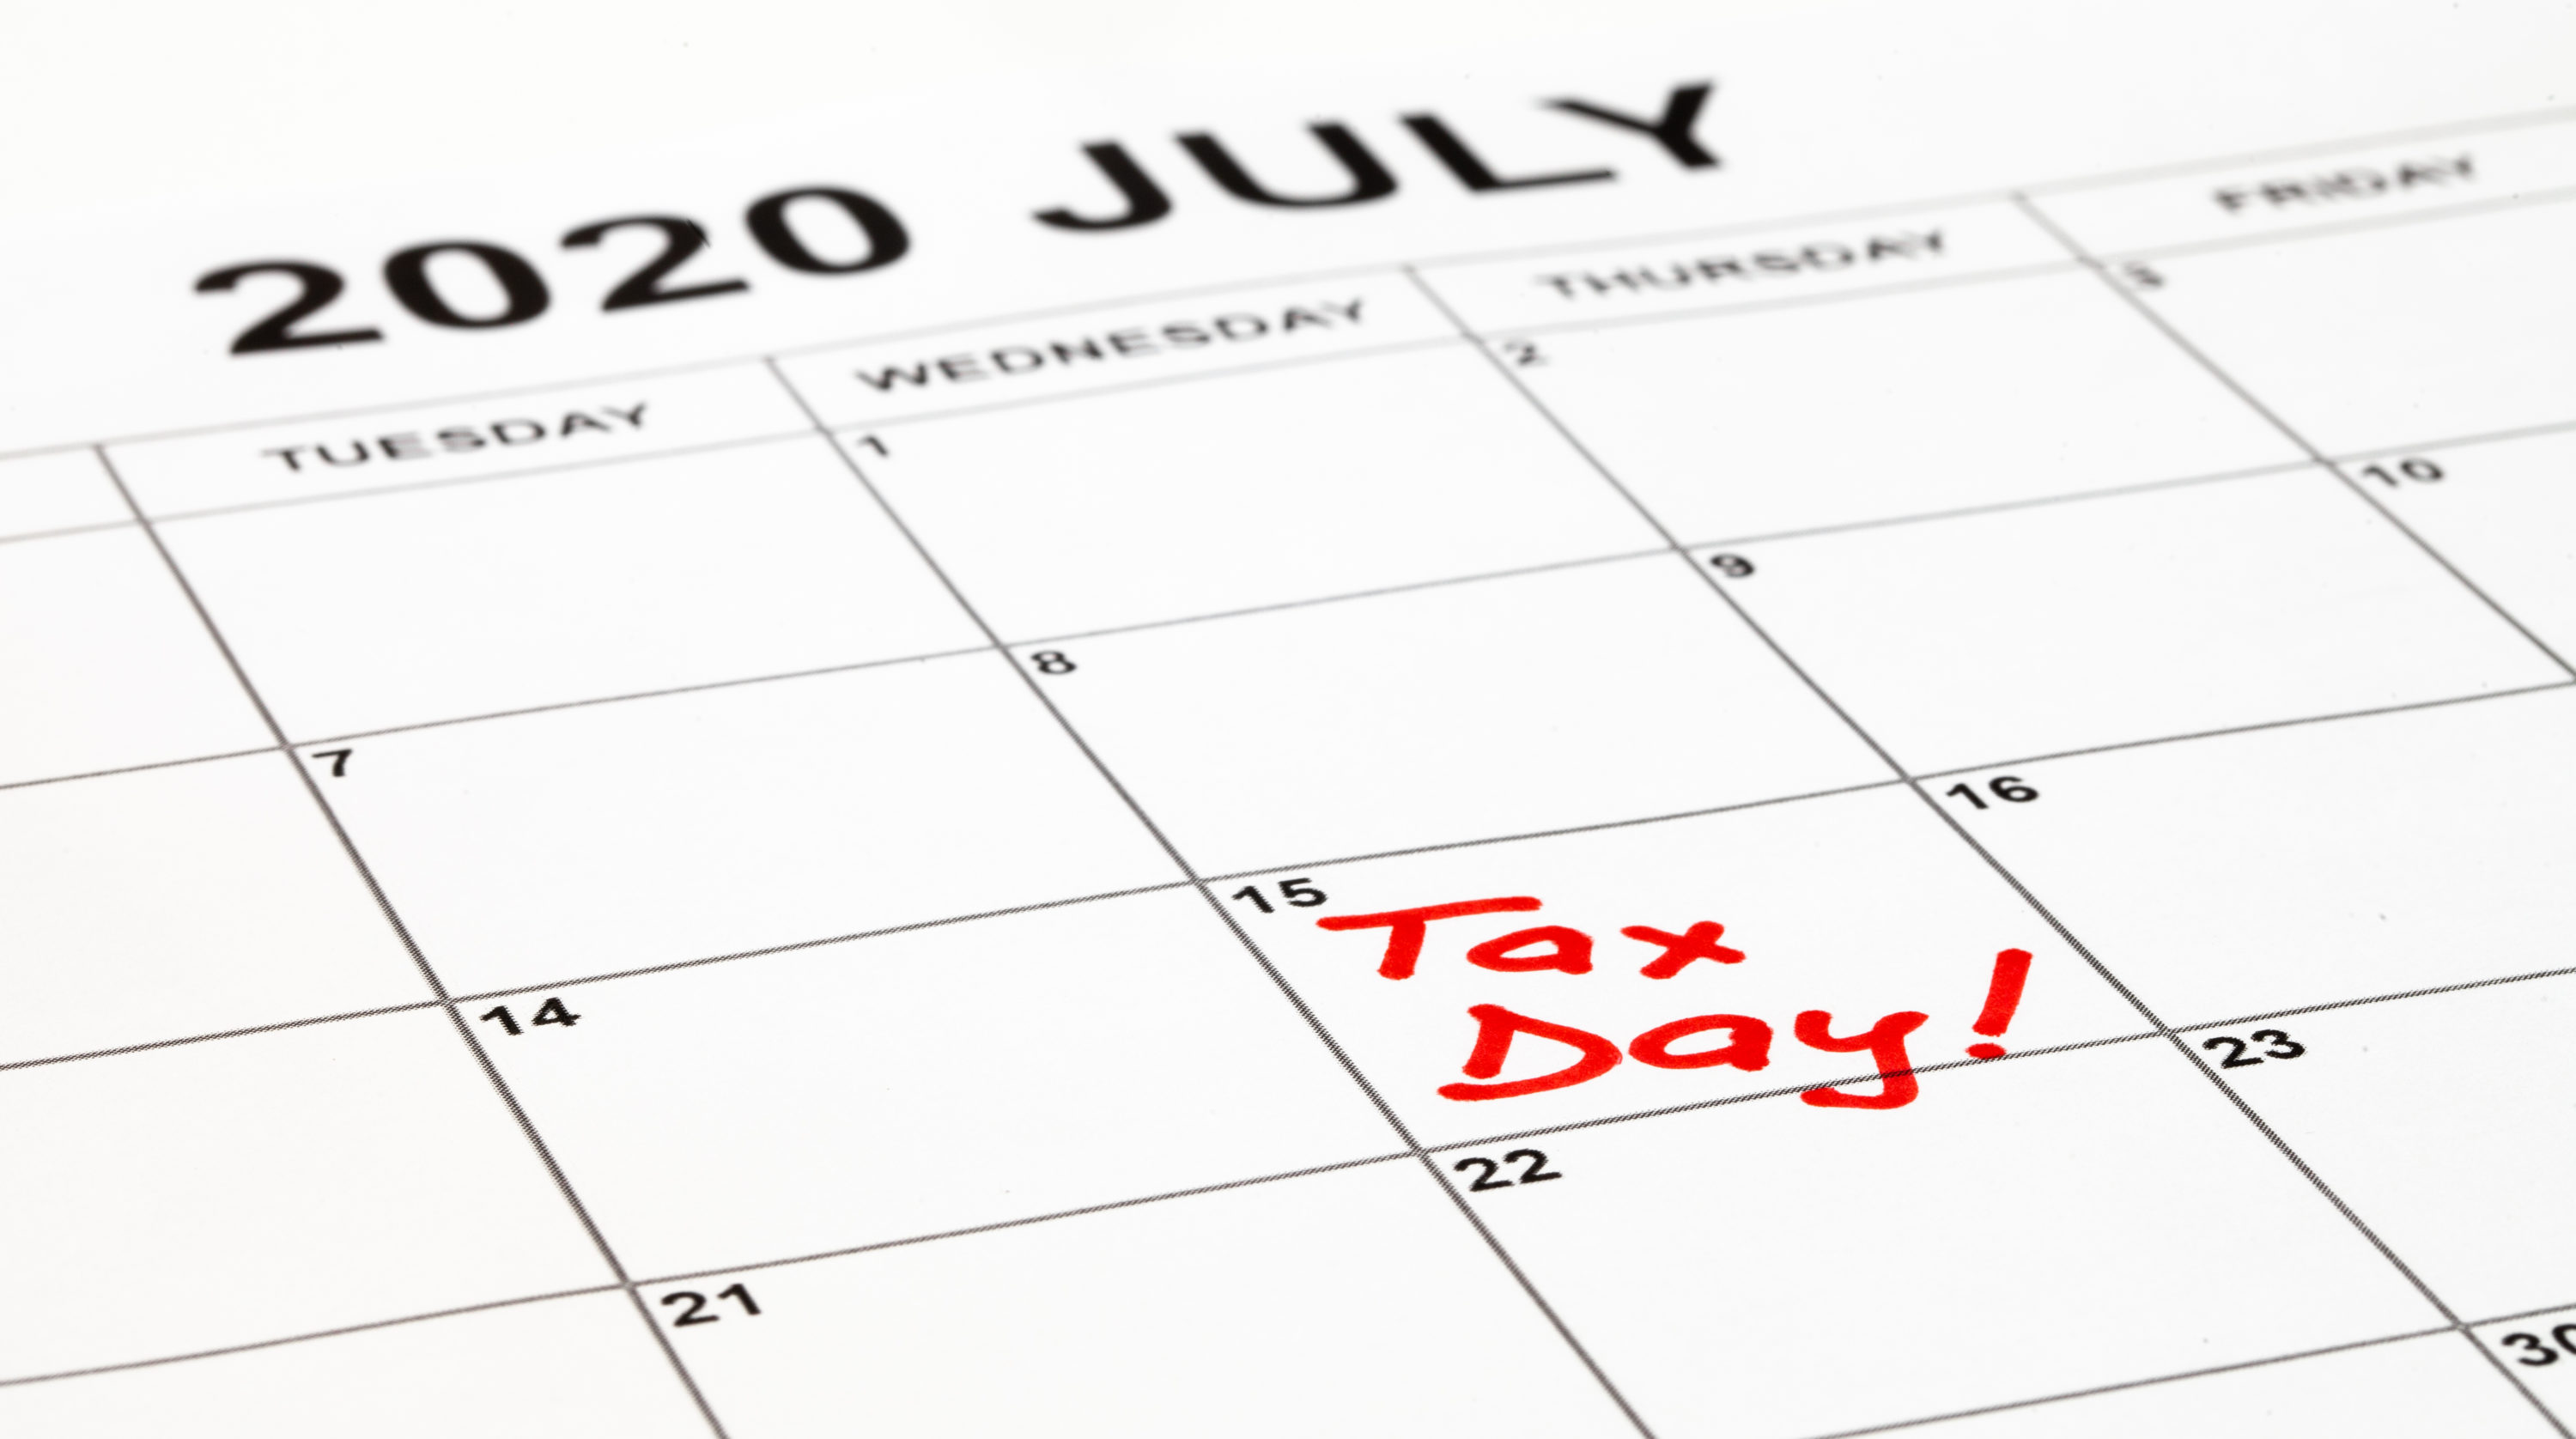 The gift tax filing and payment deadlines have been extended